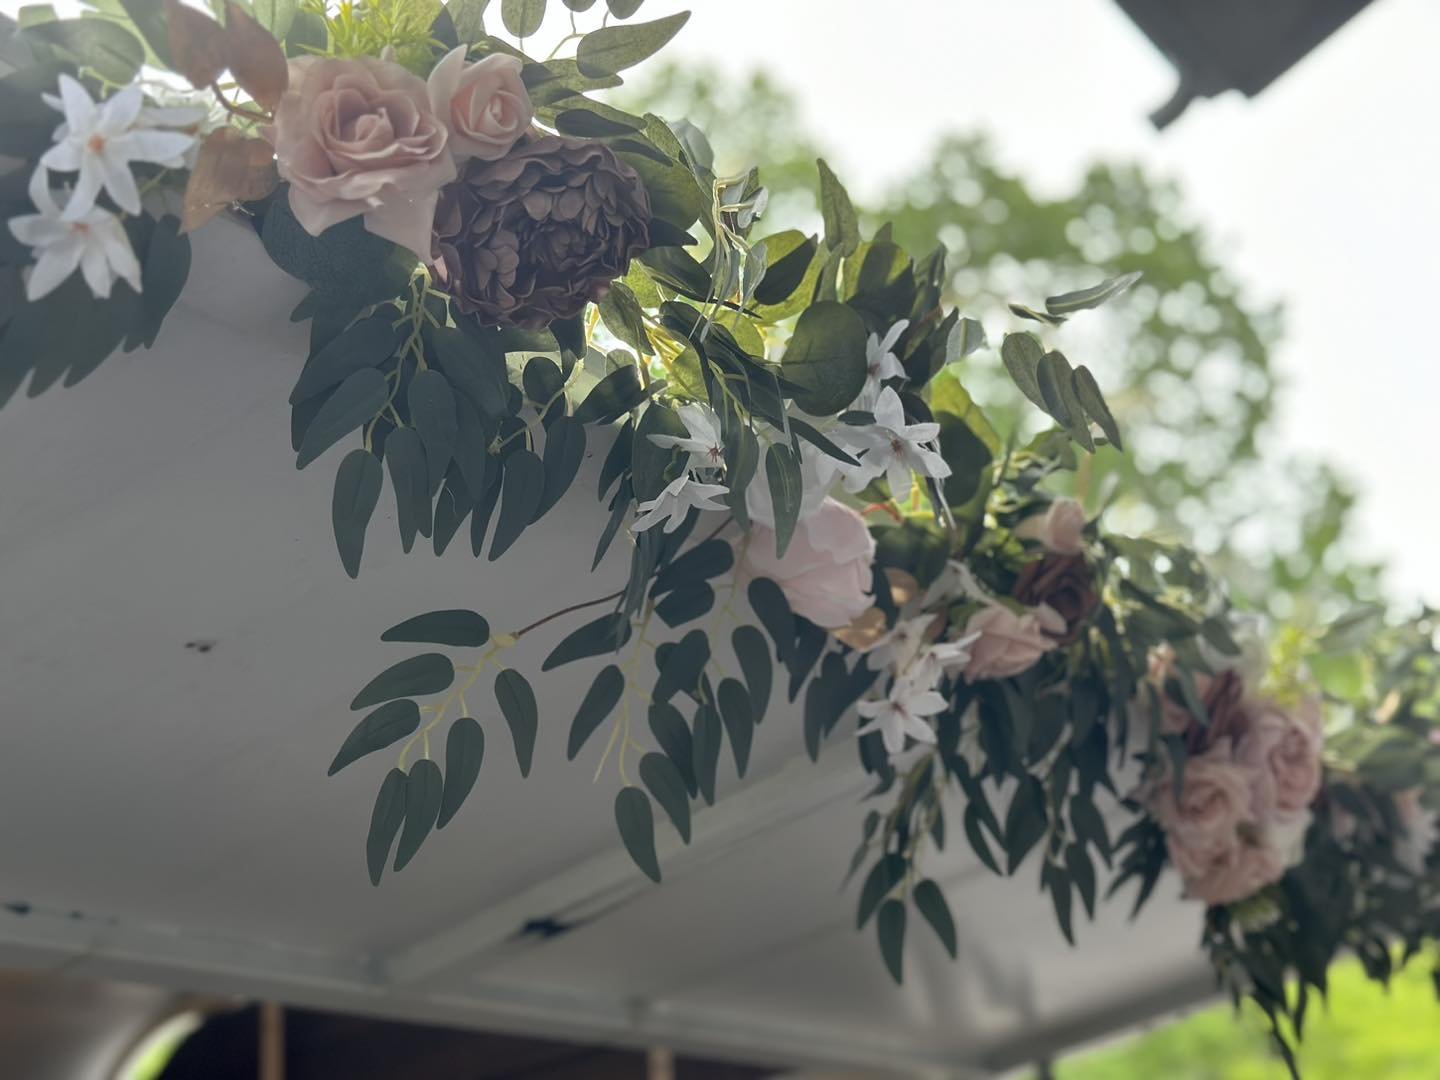 Stepped up the flowers for a venue open house this week! The bar is actually pretty neutral when we start and you can make it your style!! 

#vintagehorsetrailer #georgiawedding #womeninbusiness #georgiapeach #mobilebar #cheers #mobilebartending #mob